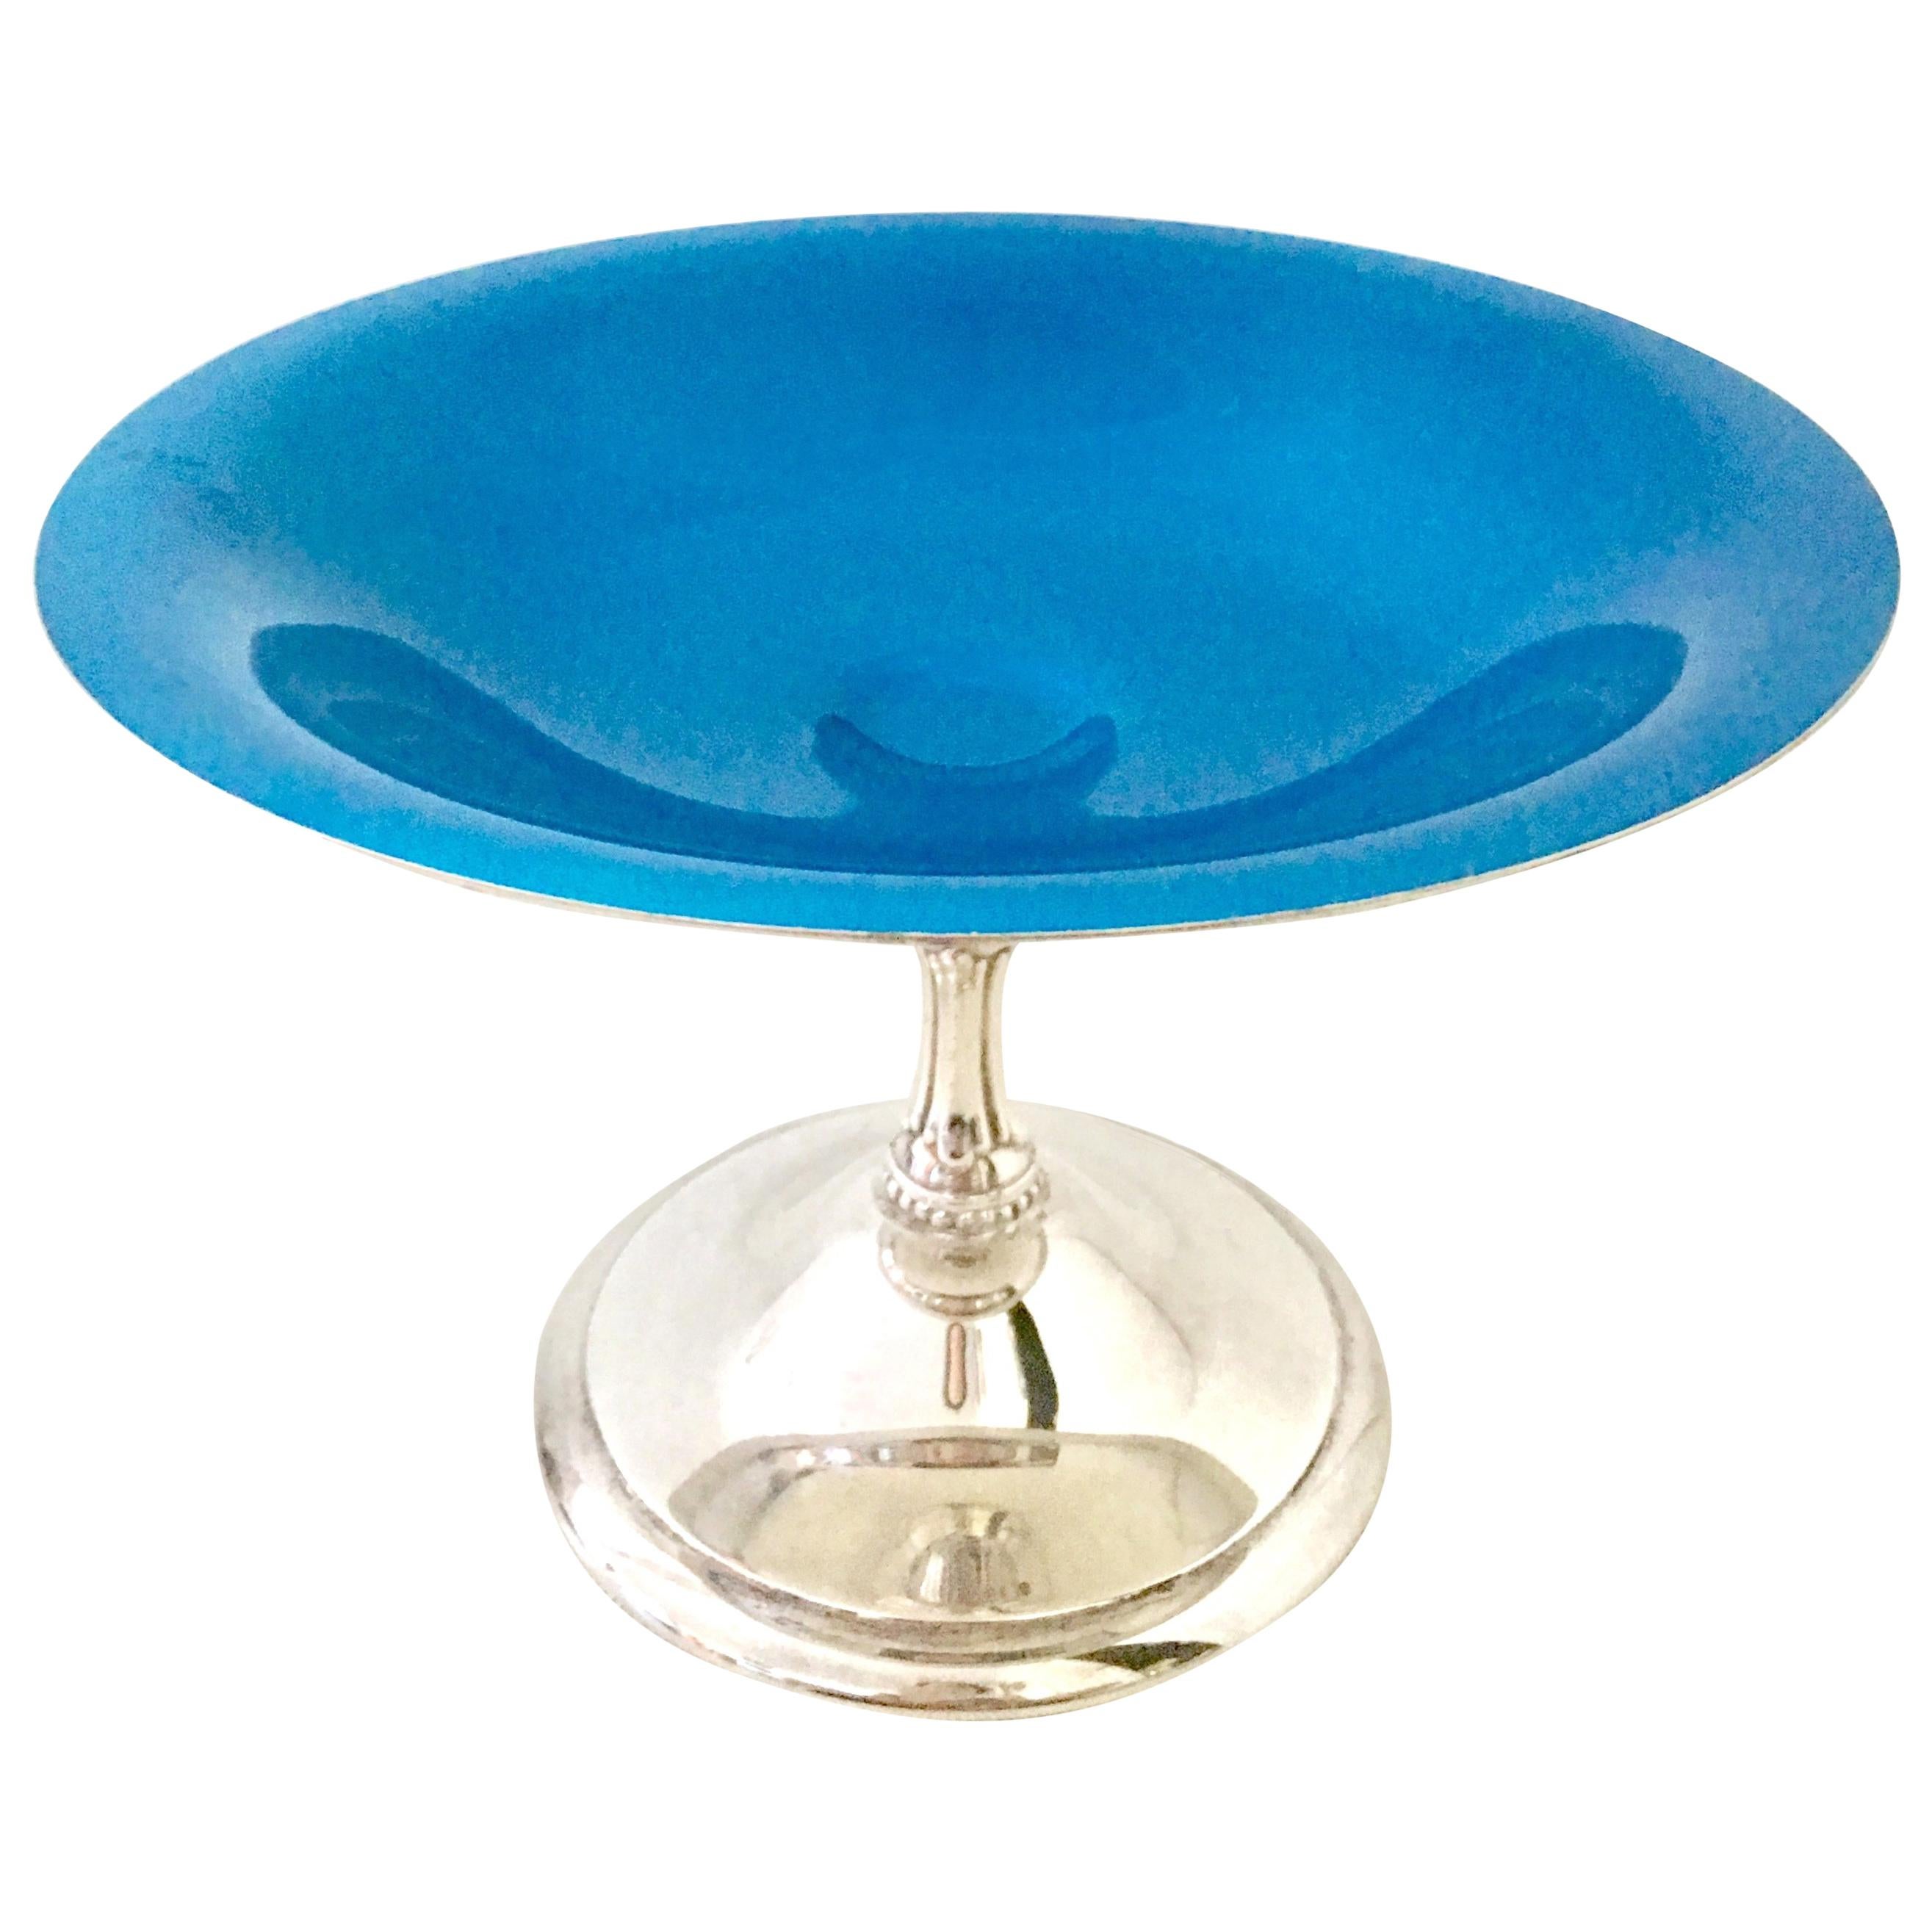 20th Century Silver Plate and Enamel Pedestal Serving Compote by Reed & Barton For Sale